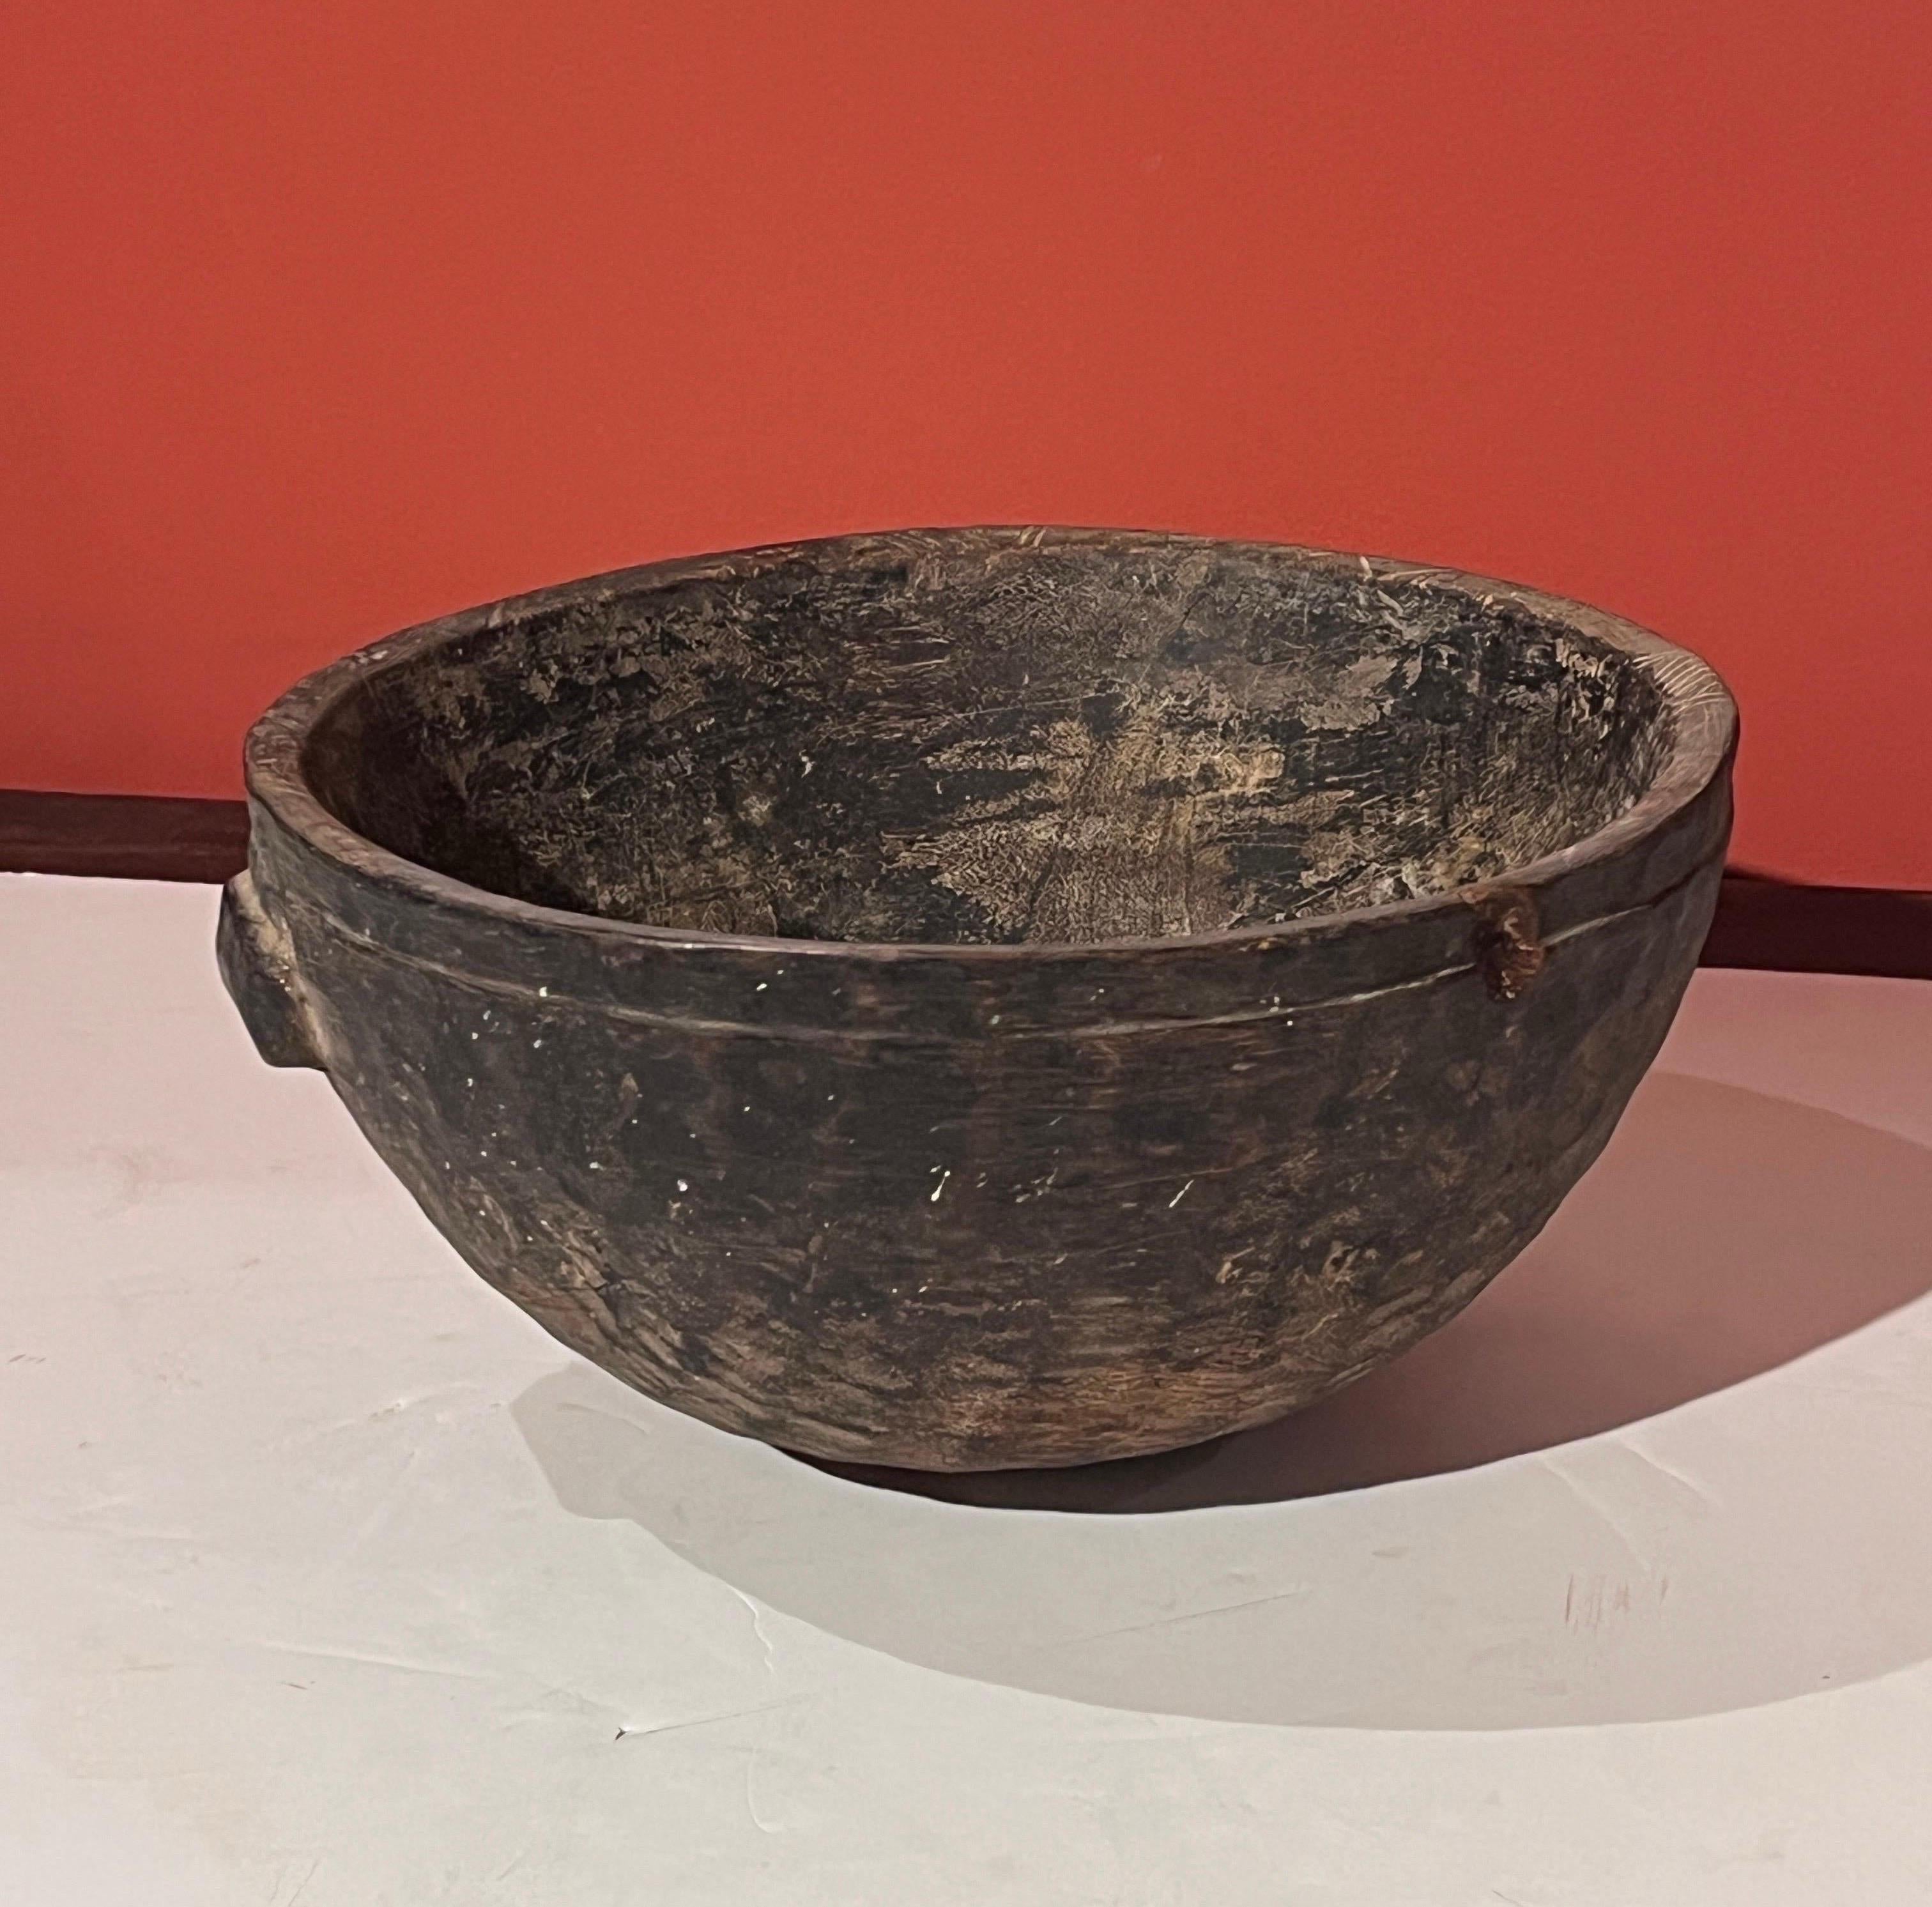 A tall, circular,  hand carved wooden milk bowl from West Africa.  This piece, carved from a single piece of local wood, exhibits a gorgeous patina showing years of use storing and transporting milk.  Made by  the semi nomadic  Tuareg people of